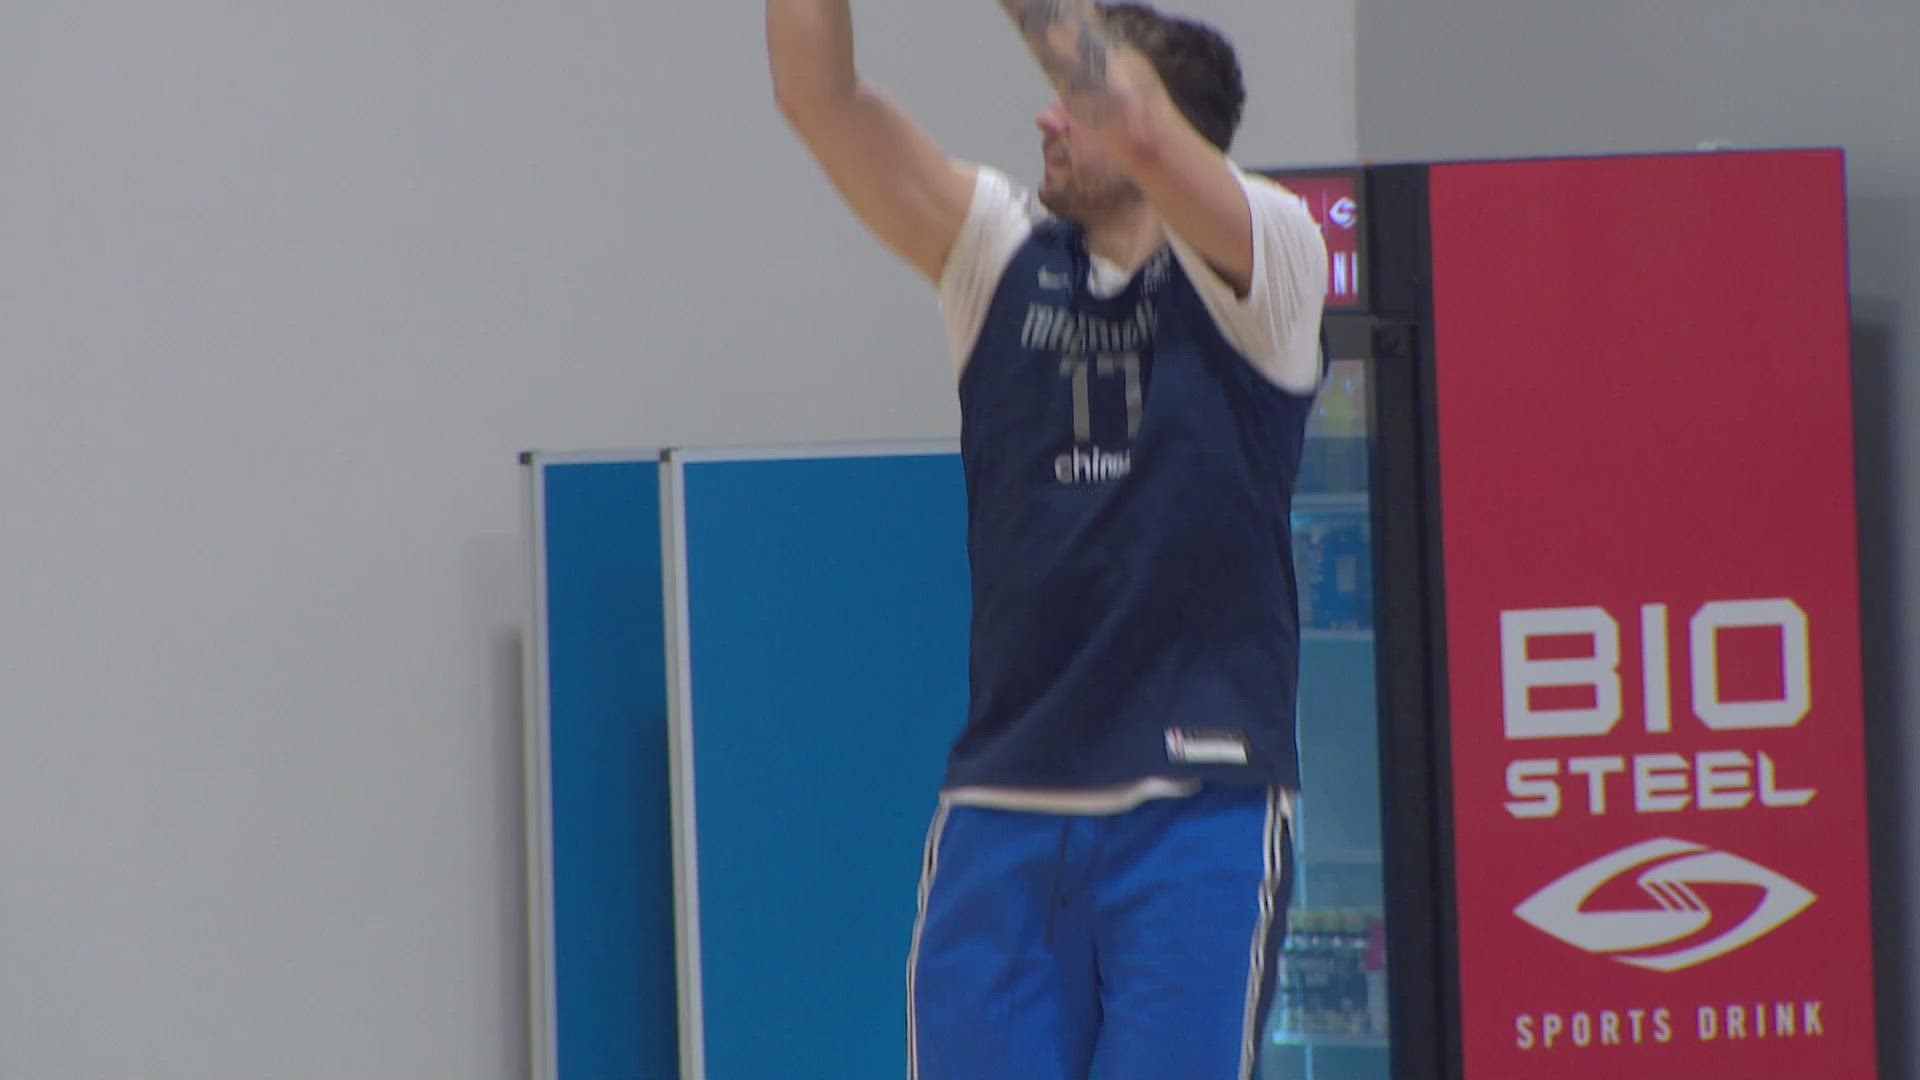 Mavs star Luka Doncic took some shots at Wednesday's Dallas Mavericks practice, one day before the team plays the Utah Jazz in Game 3 of the 2022 NBA Playoffs.